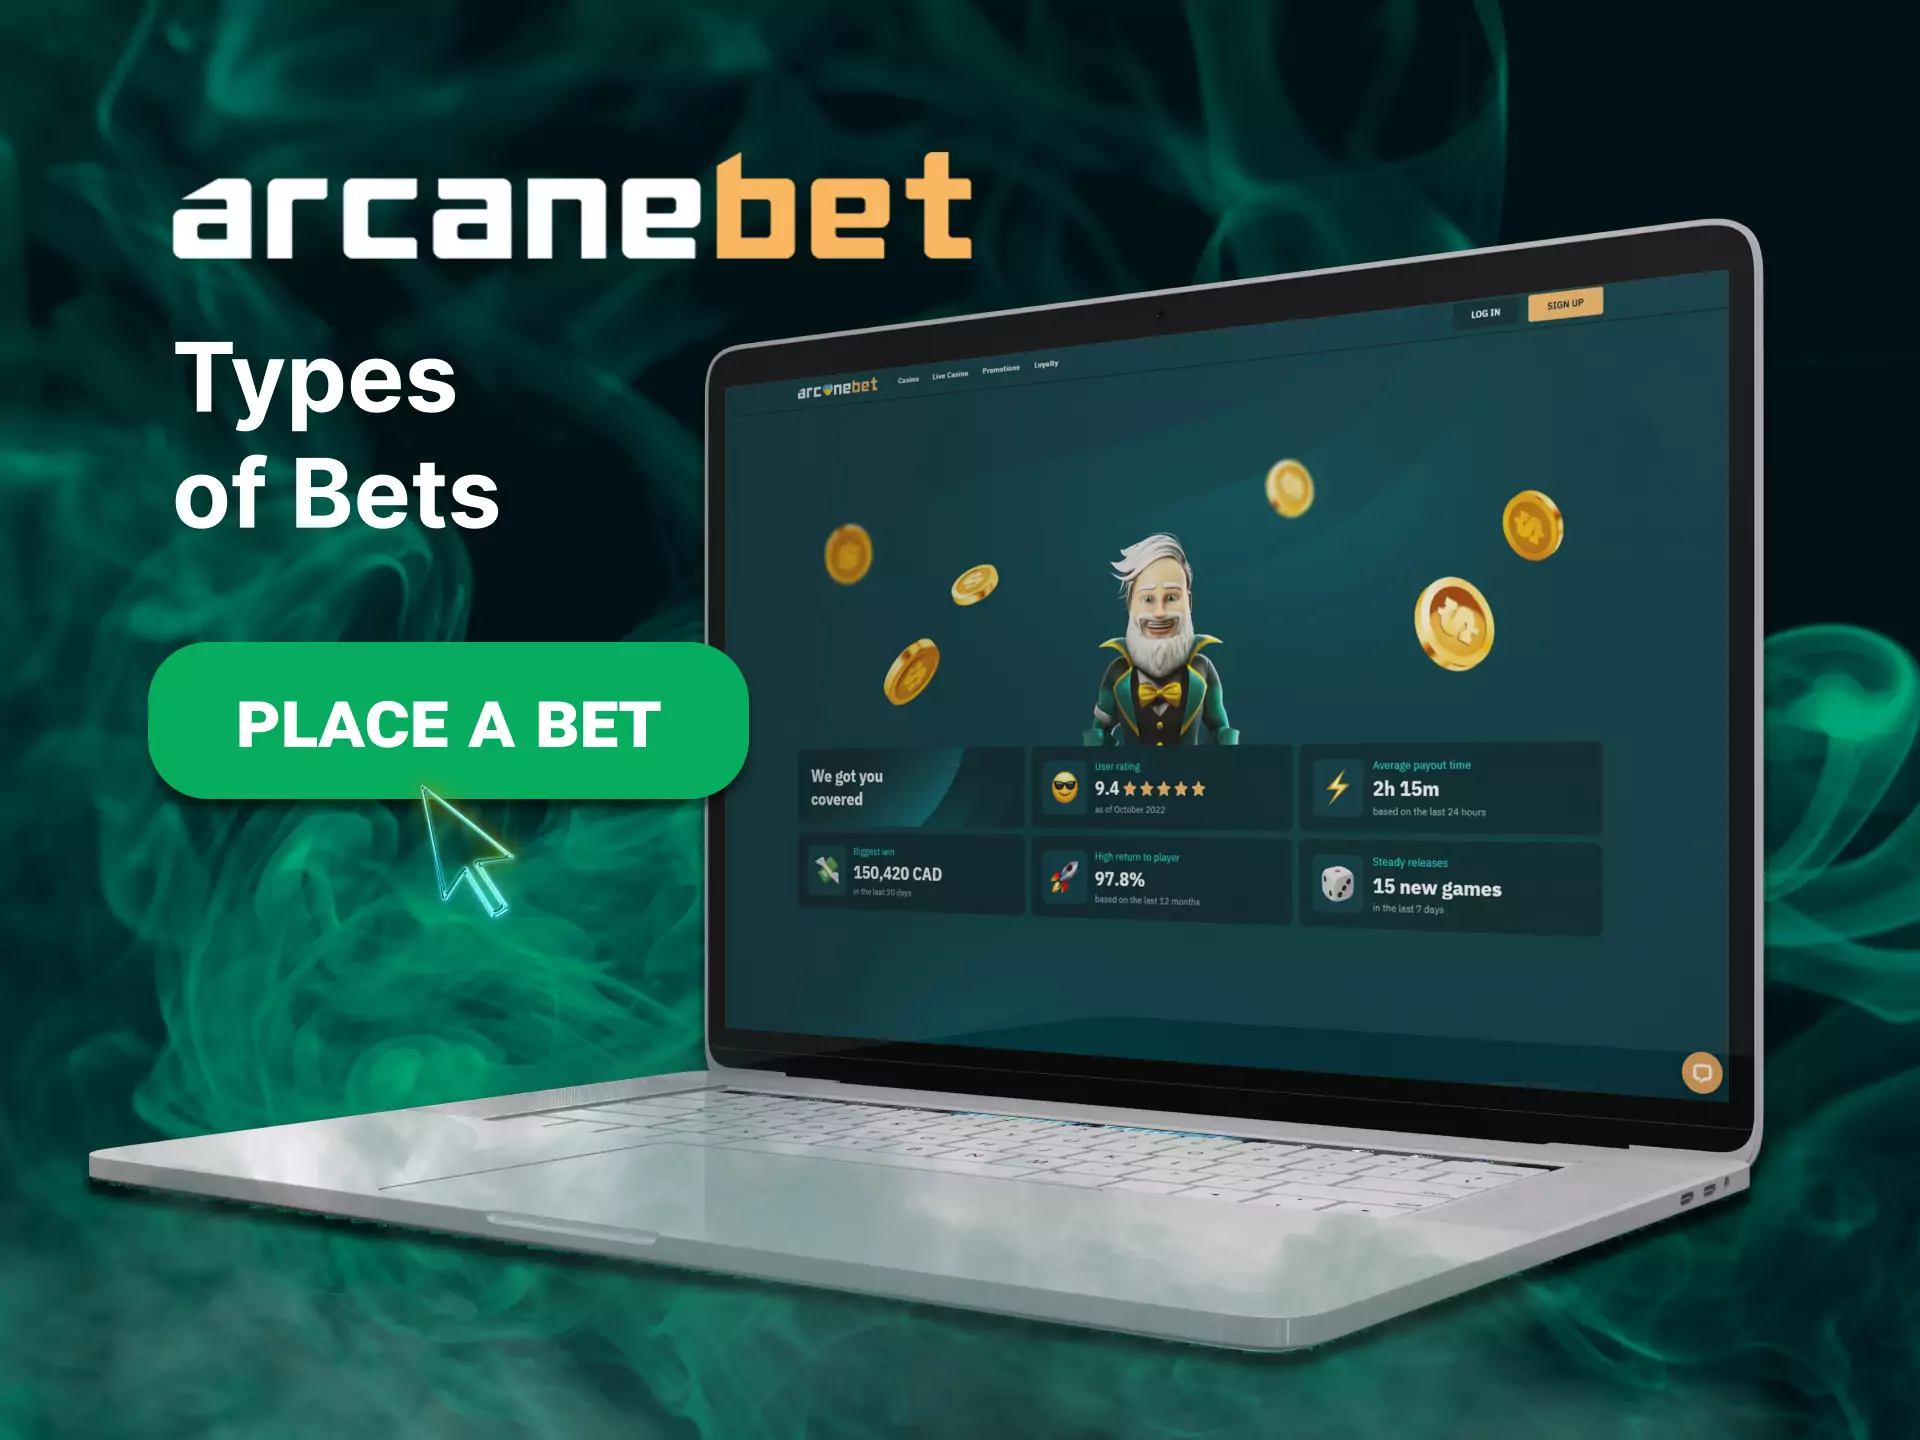 Find out about all types of bets on Arcanebet, choose the ones that are convenient for you.